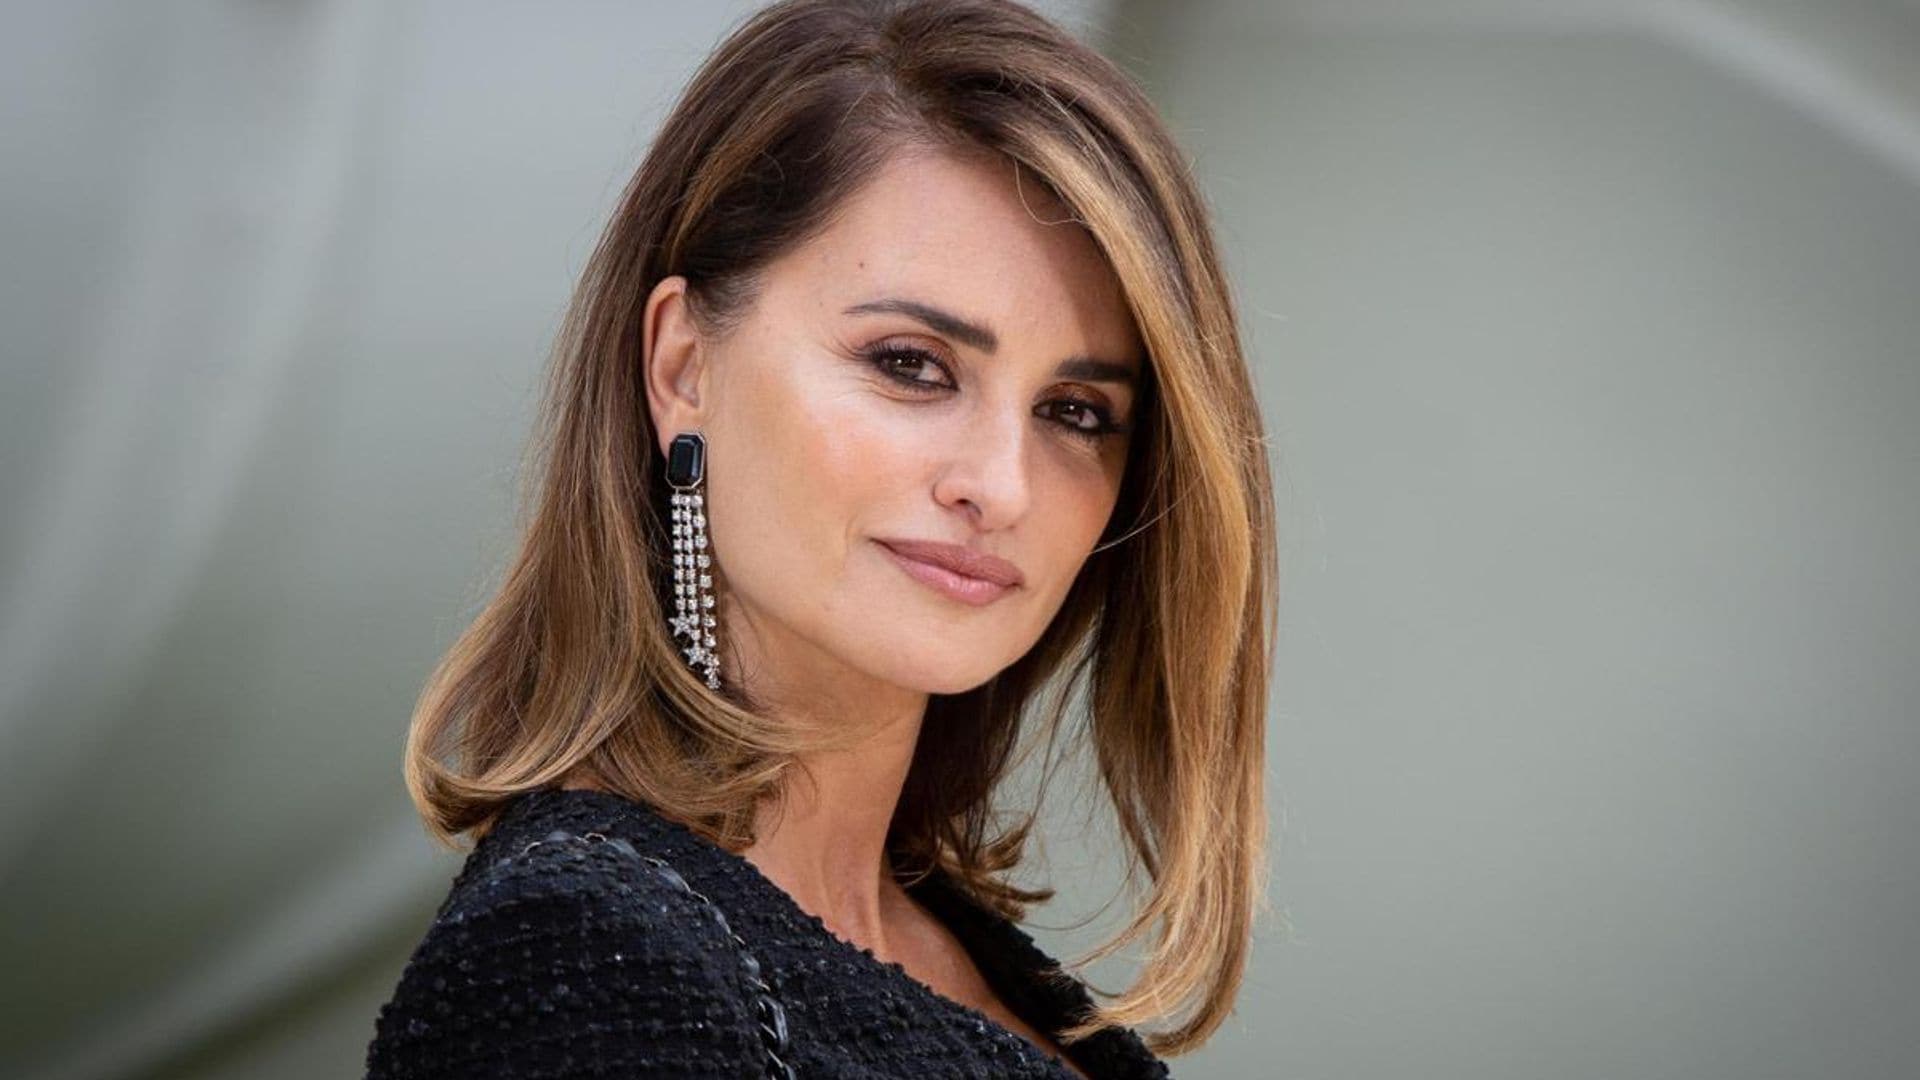 WATCH: Penélope Cruz brings to life a determined supermarket worker in the upcoming film ‘On The Fringe’